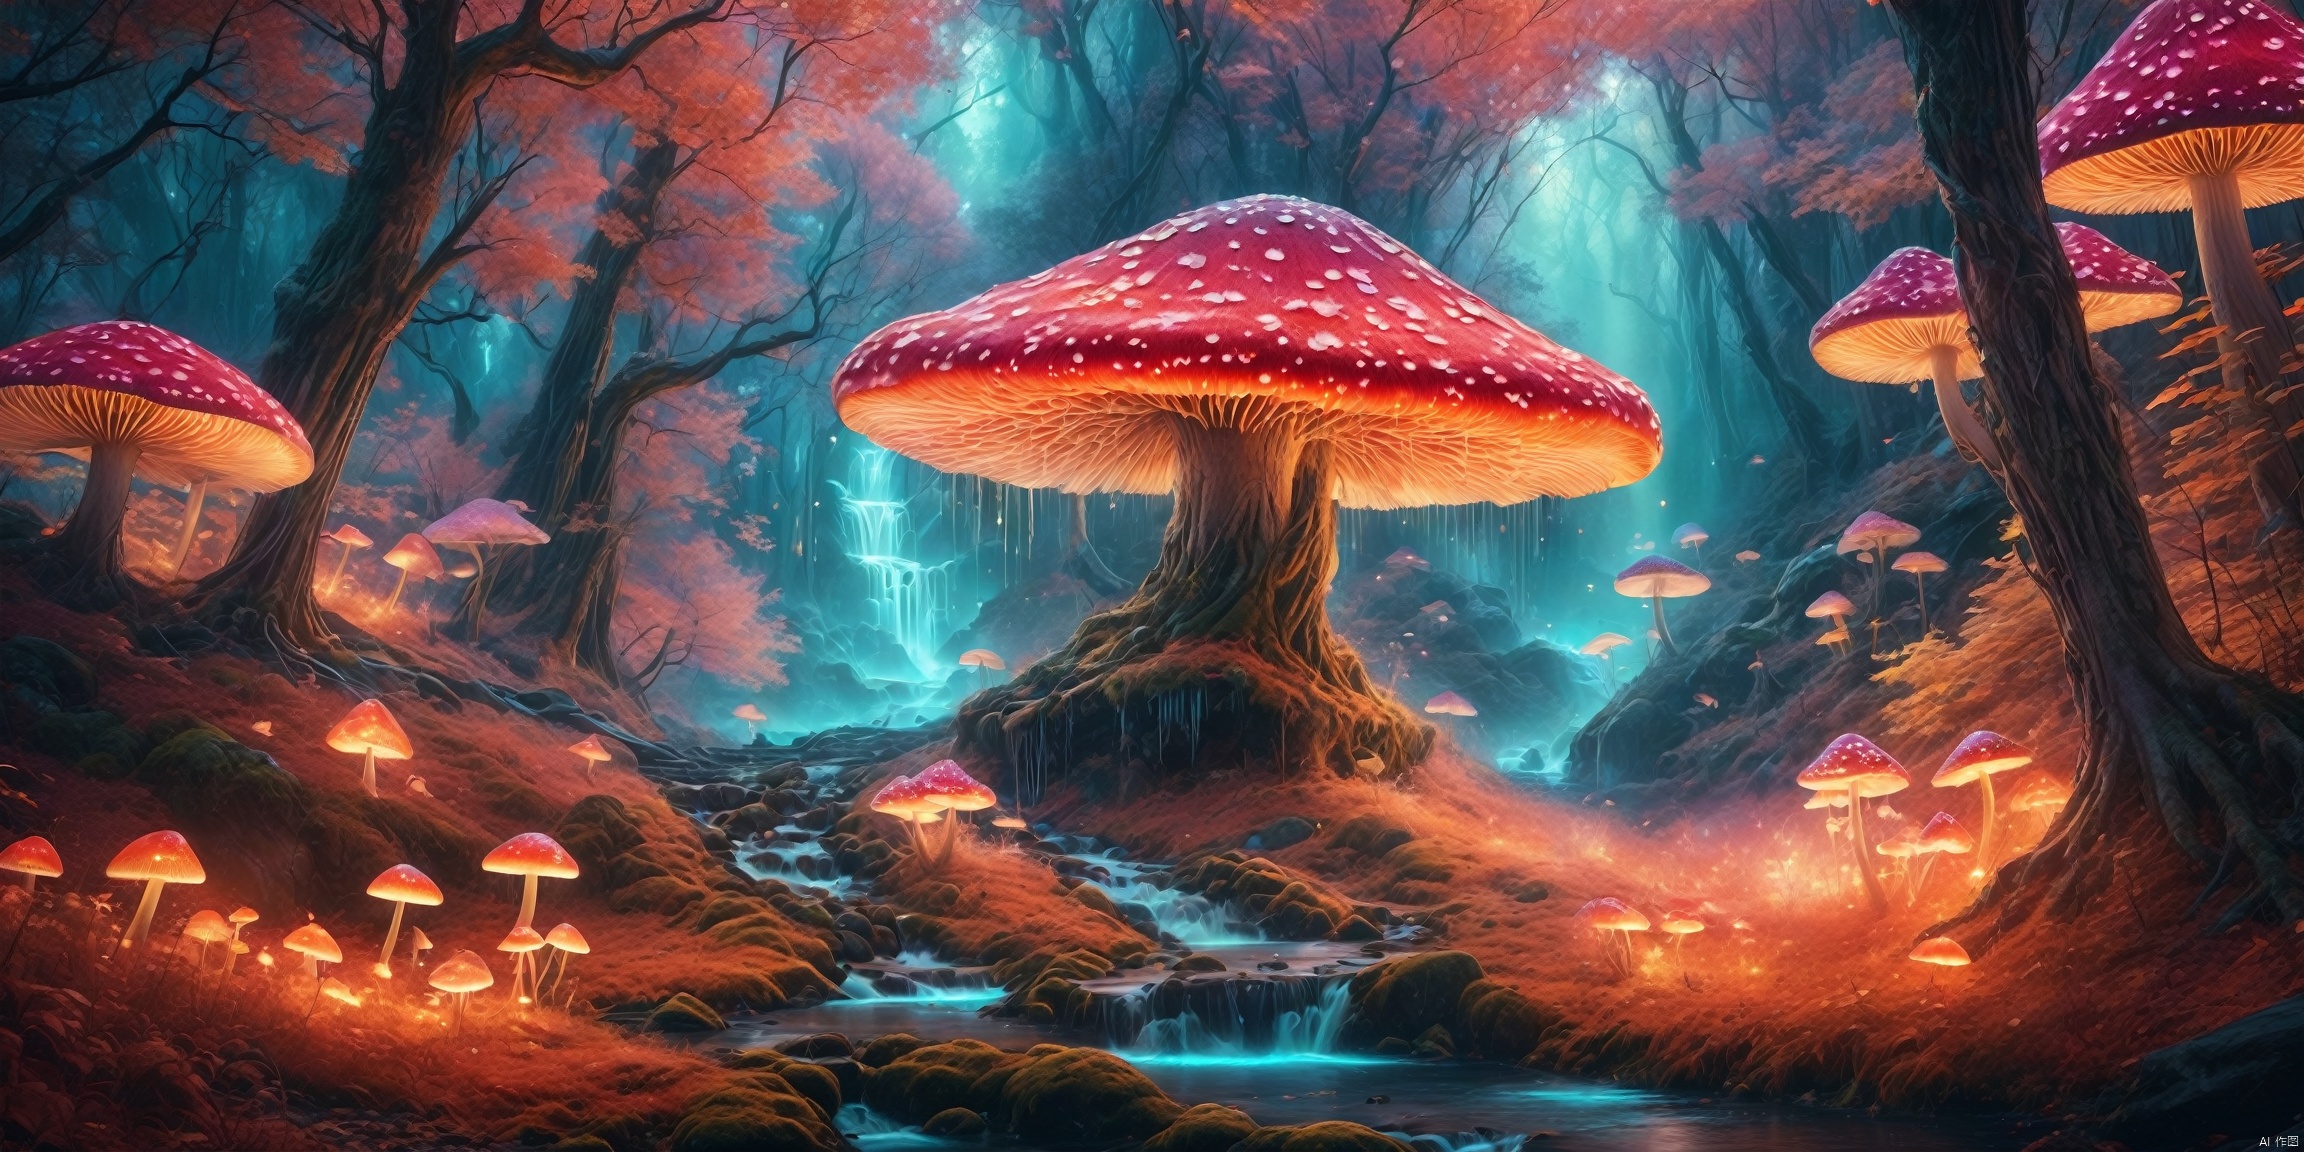  absurdres, highres, ultra detailed, (1girl), BREAK, infrared photography, otherworldly hues, surreal landscapes, unseen light, ethereal glow, vibrant colors, ghostly effect, 
Enchanted forest with shimmering fireflies, mystical glowing mushrooms, ancient trees with intricate carvings, a hidden pathway leading to a magical waterfall, ethereal mist floating in the air, creating a dreamlike atmosphere, illustration style capturing the fantastical elements, by a stream, , glow